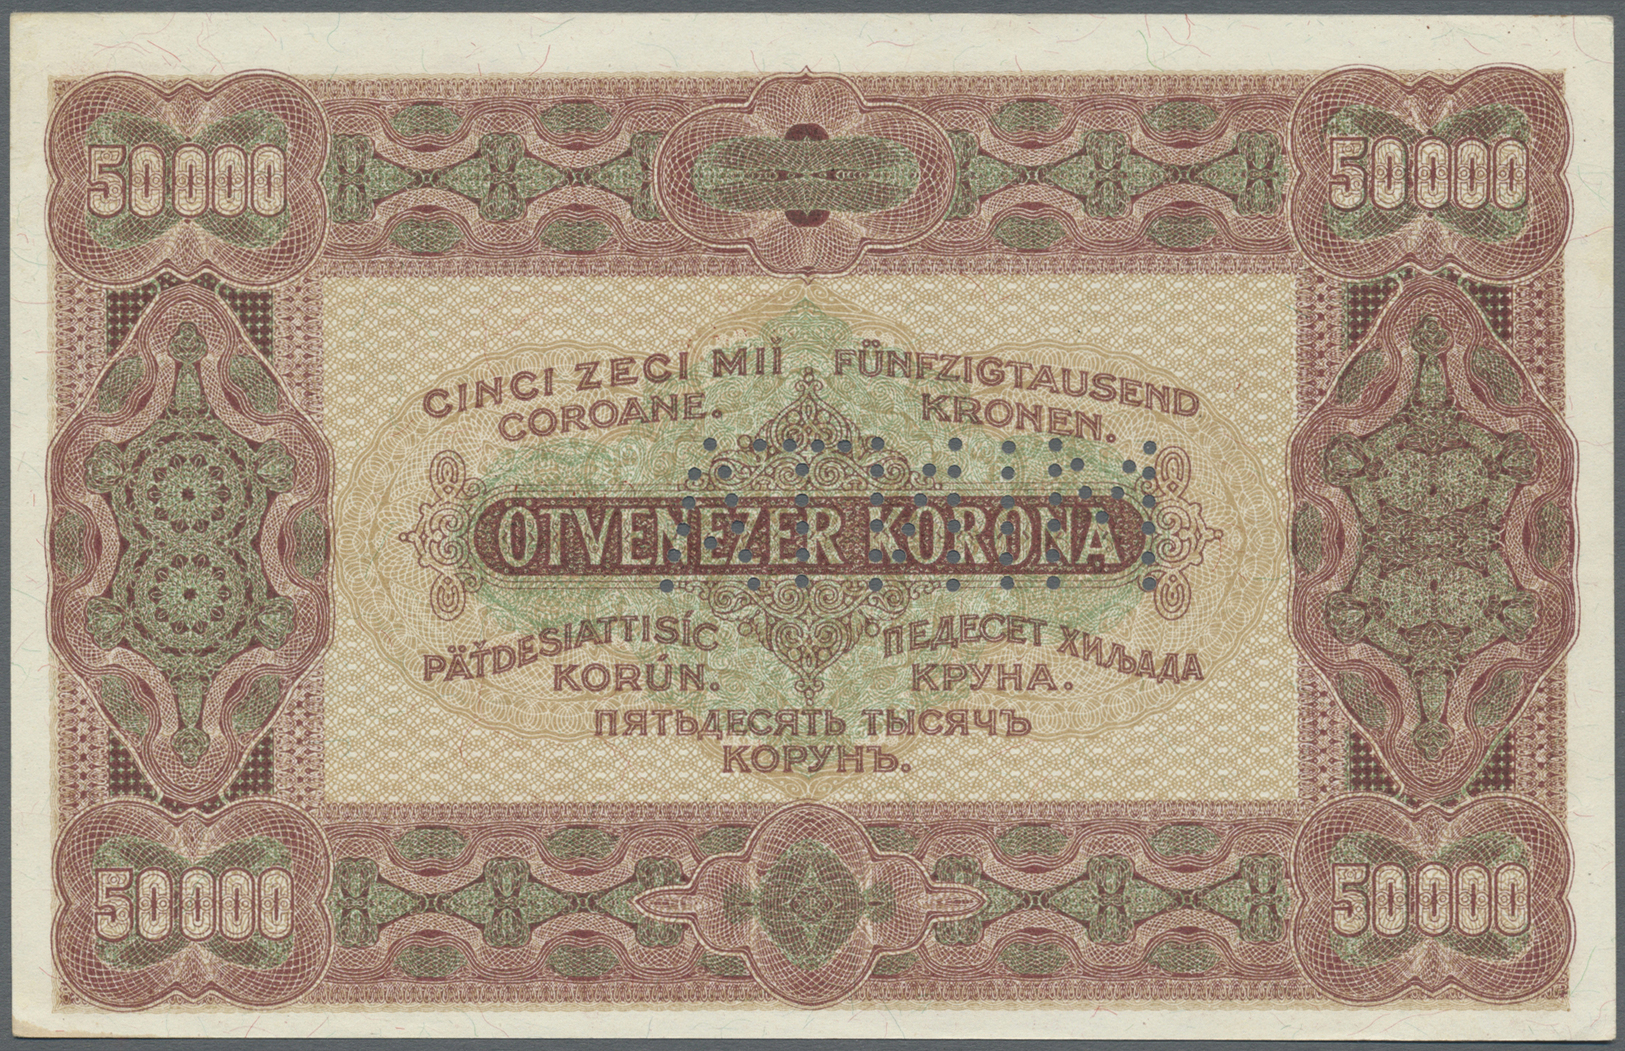 01008 Hungary / Ungarn: 50.000 Korona 1923 SPECIMEN With Perforation "MINTA" And Serial 000000, P.71as In Excellent Cond - Hungary